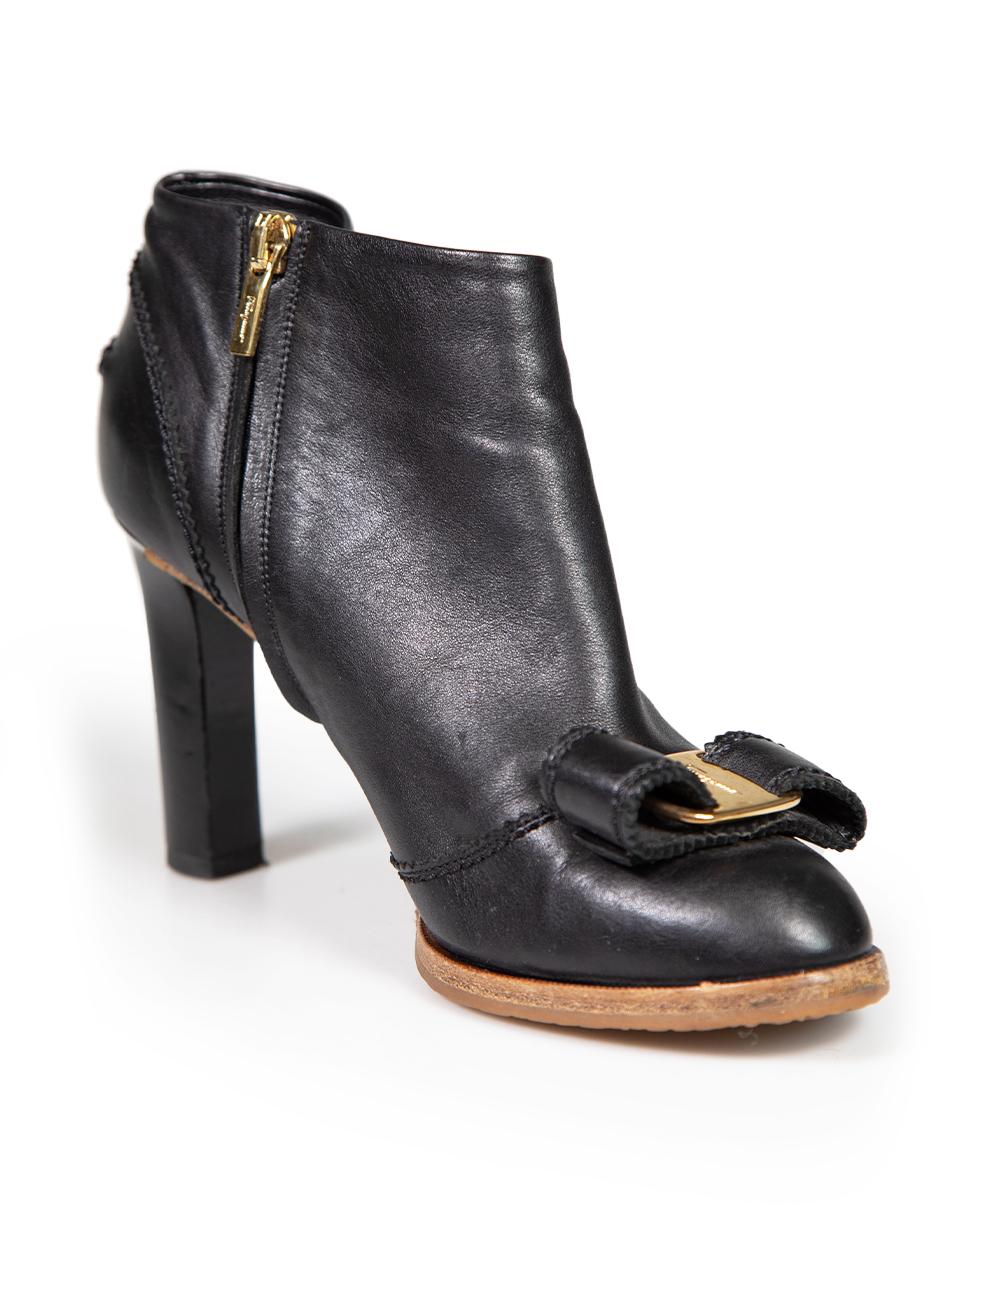 CONDITION is Good. Minor wear to boots is evident. Light scratches to overall leather tip, upper and sides of both shoes. Minimal abrasion to both heels on this used Salvatore Ferragamo designer resale item.
 
 
 
 Details
 
 
 Black
 
 Leather
 
